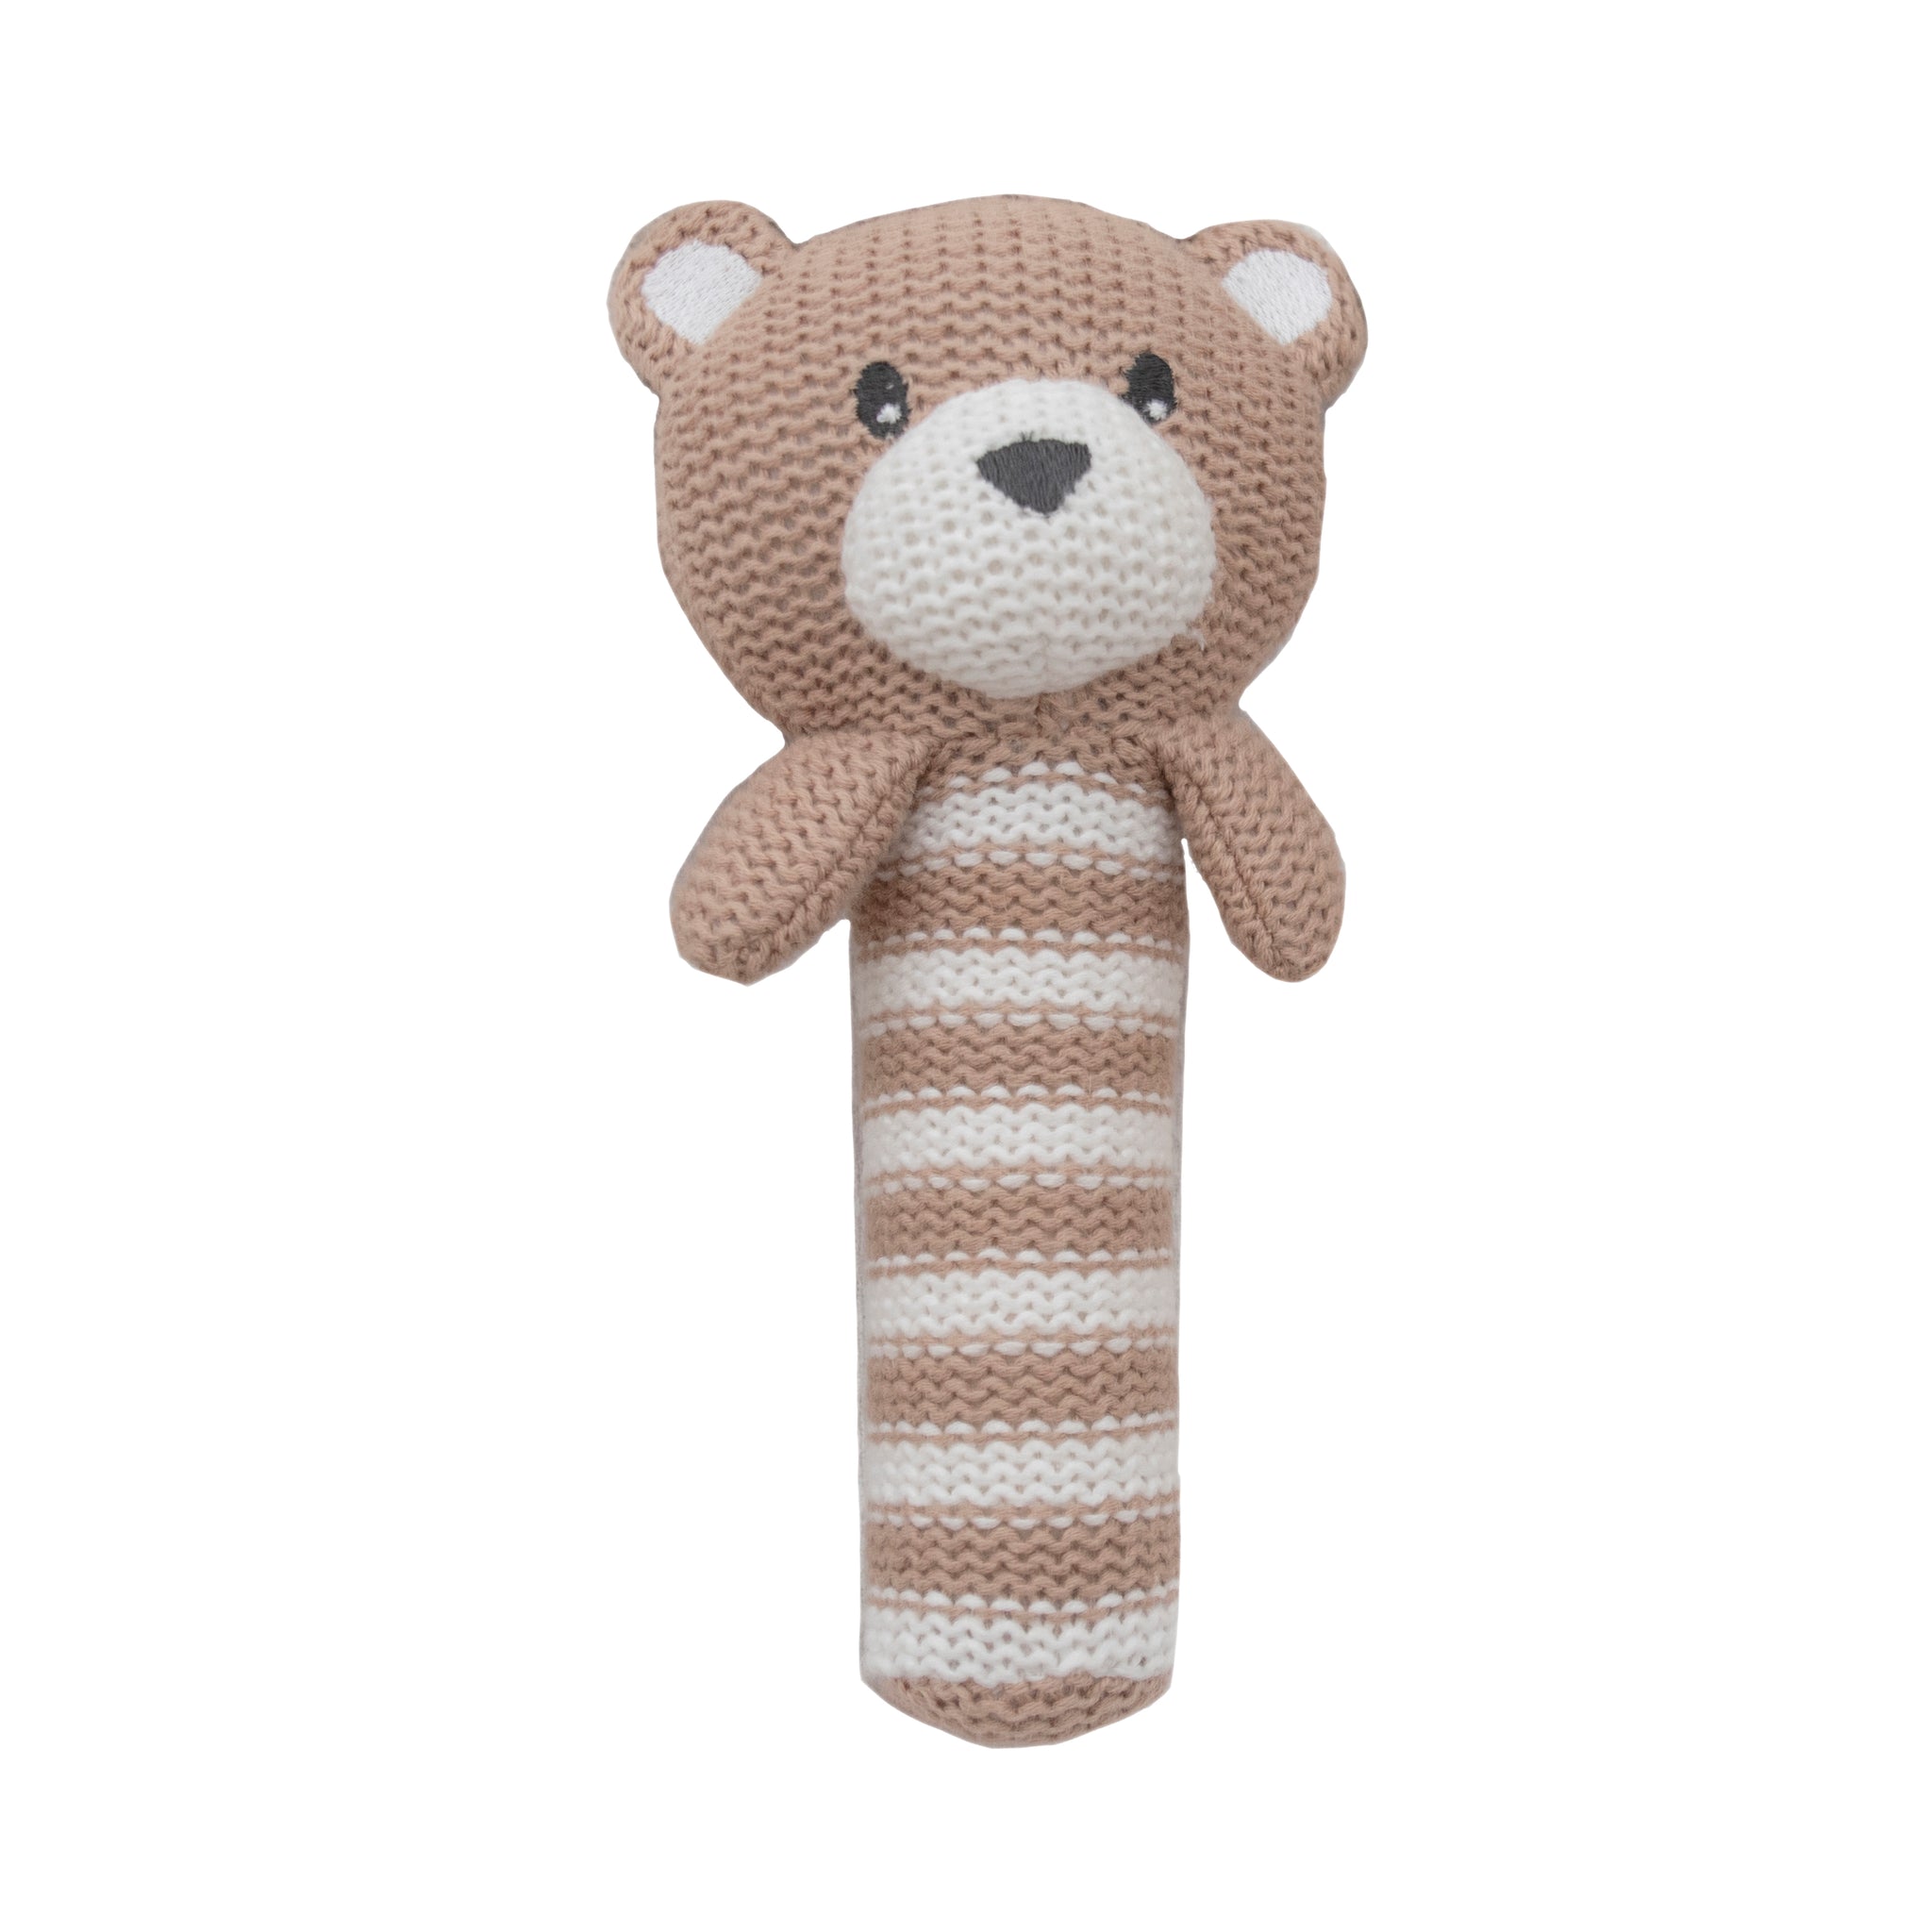 Knitted Toy - Joe Monkey  Living Textiles – Living Textiles Co